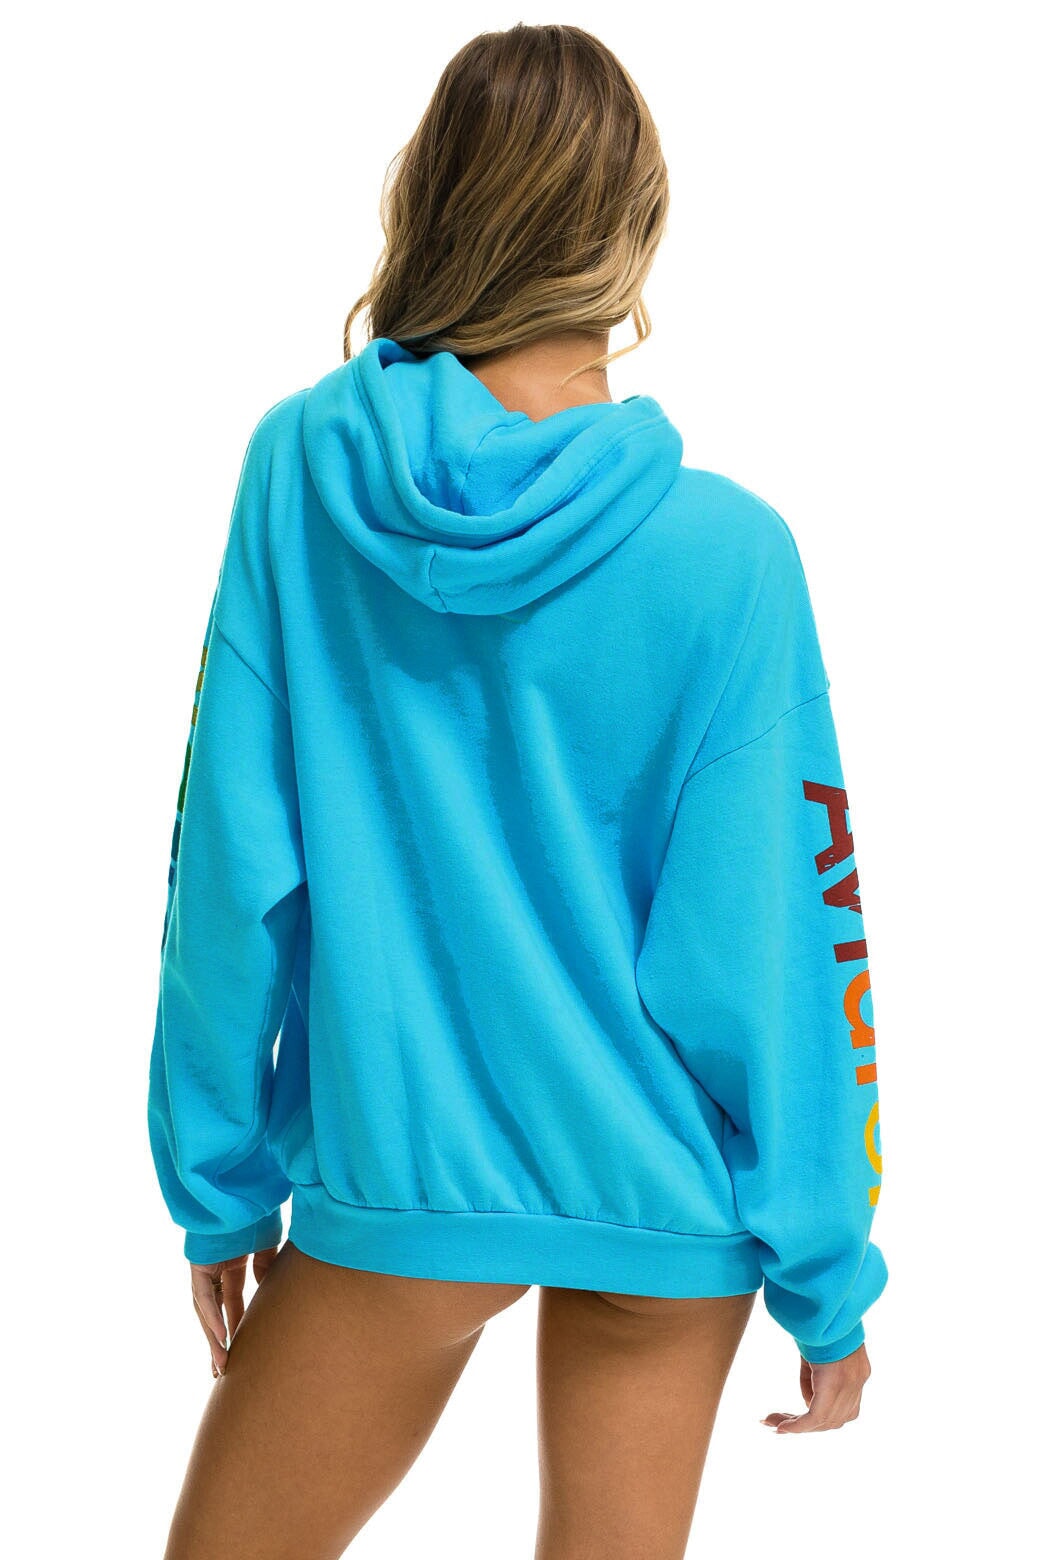 AVIATOR NATION HAMPTONS RELAXED PULLOVER HOODIE - NEON BLUE Hoodie Aviator Nation 